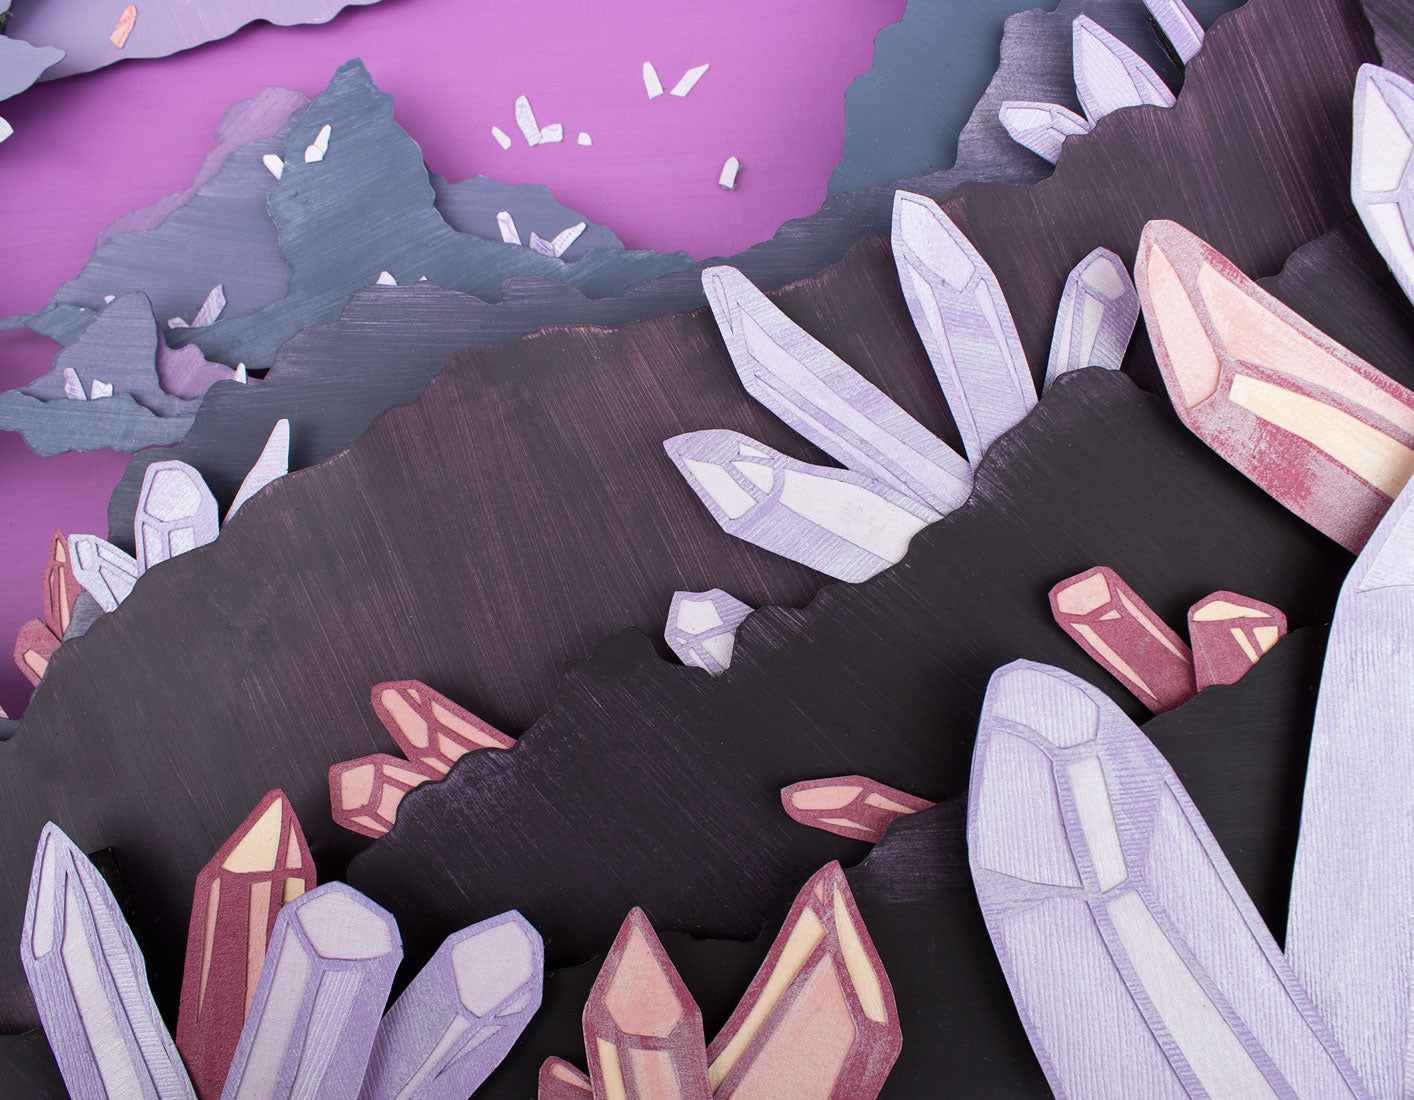 Archival print of cut paper illustration of a magical purple cave with crystals.